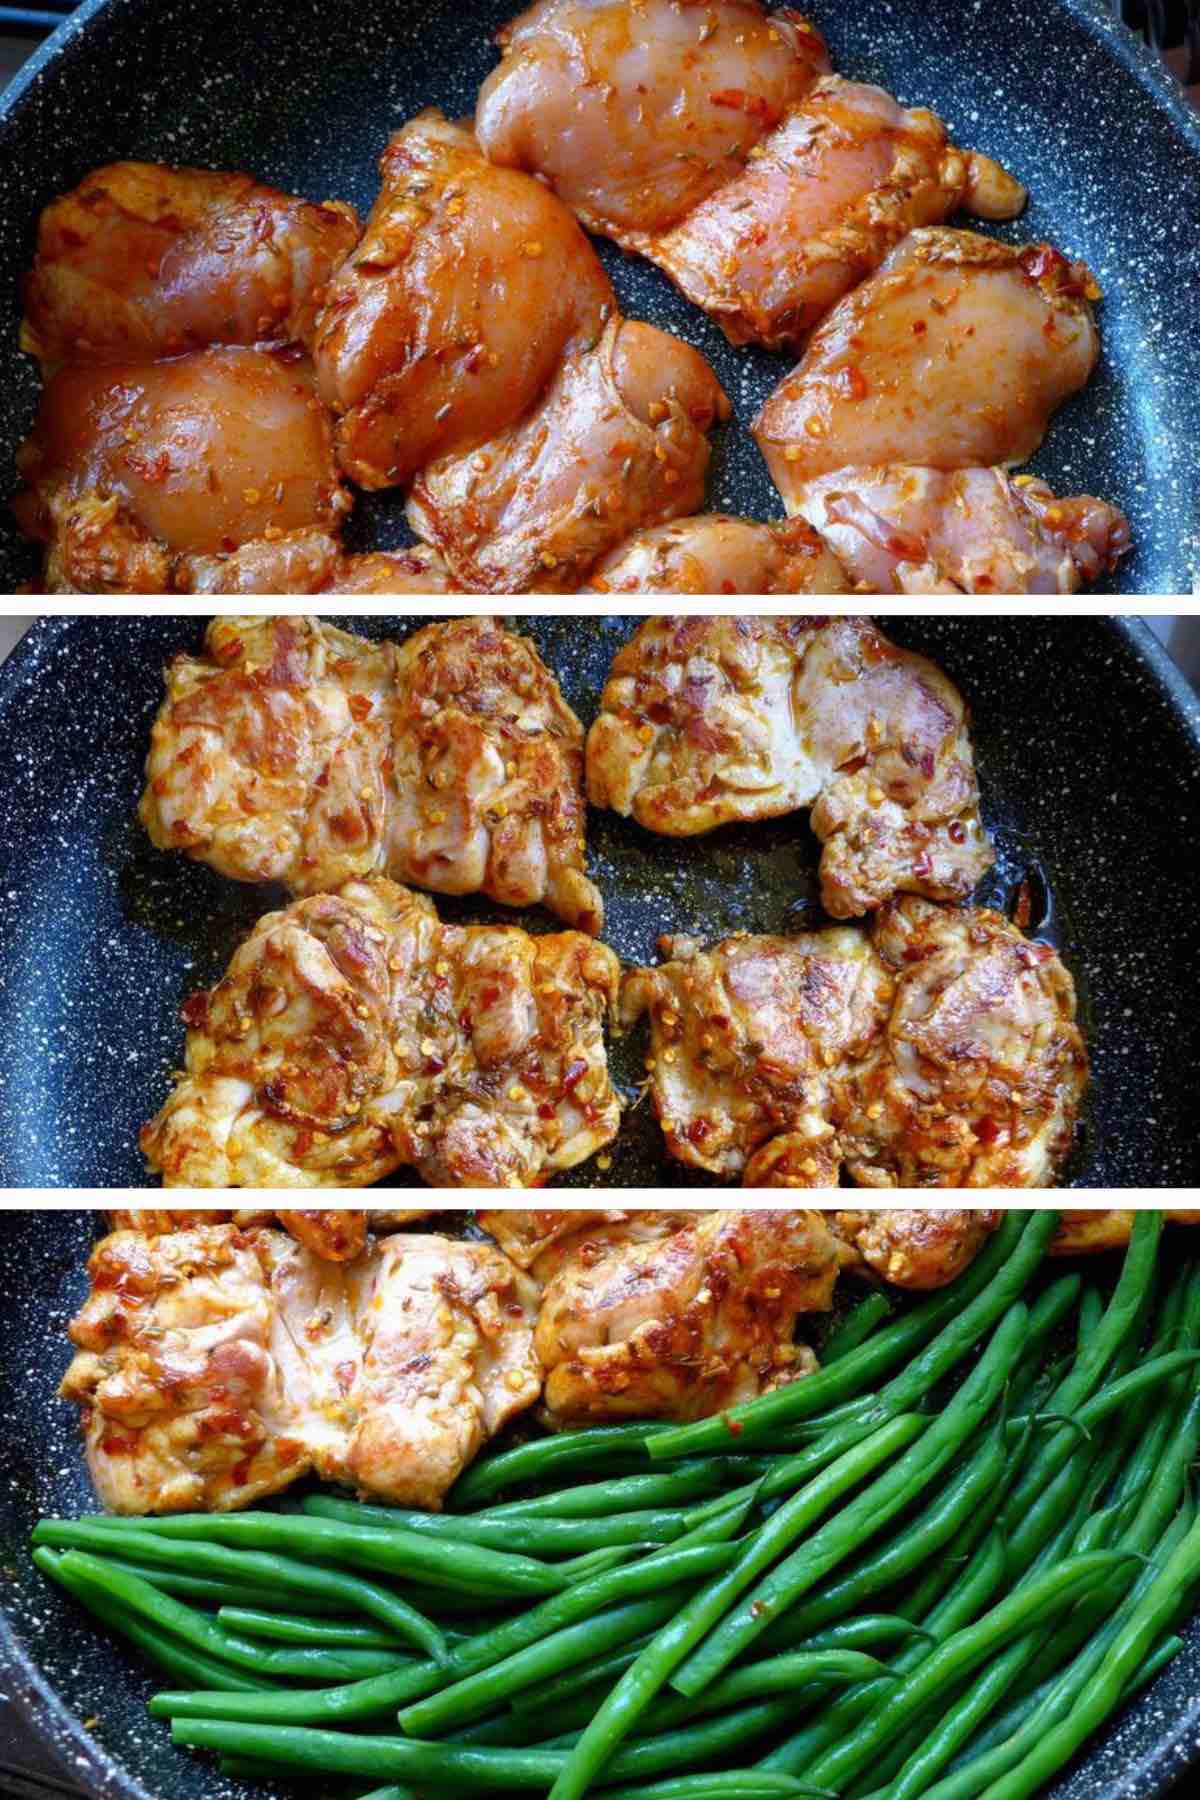 pan-frying chicken thighs with green beans.